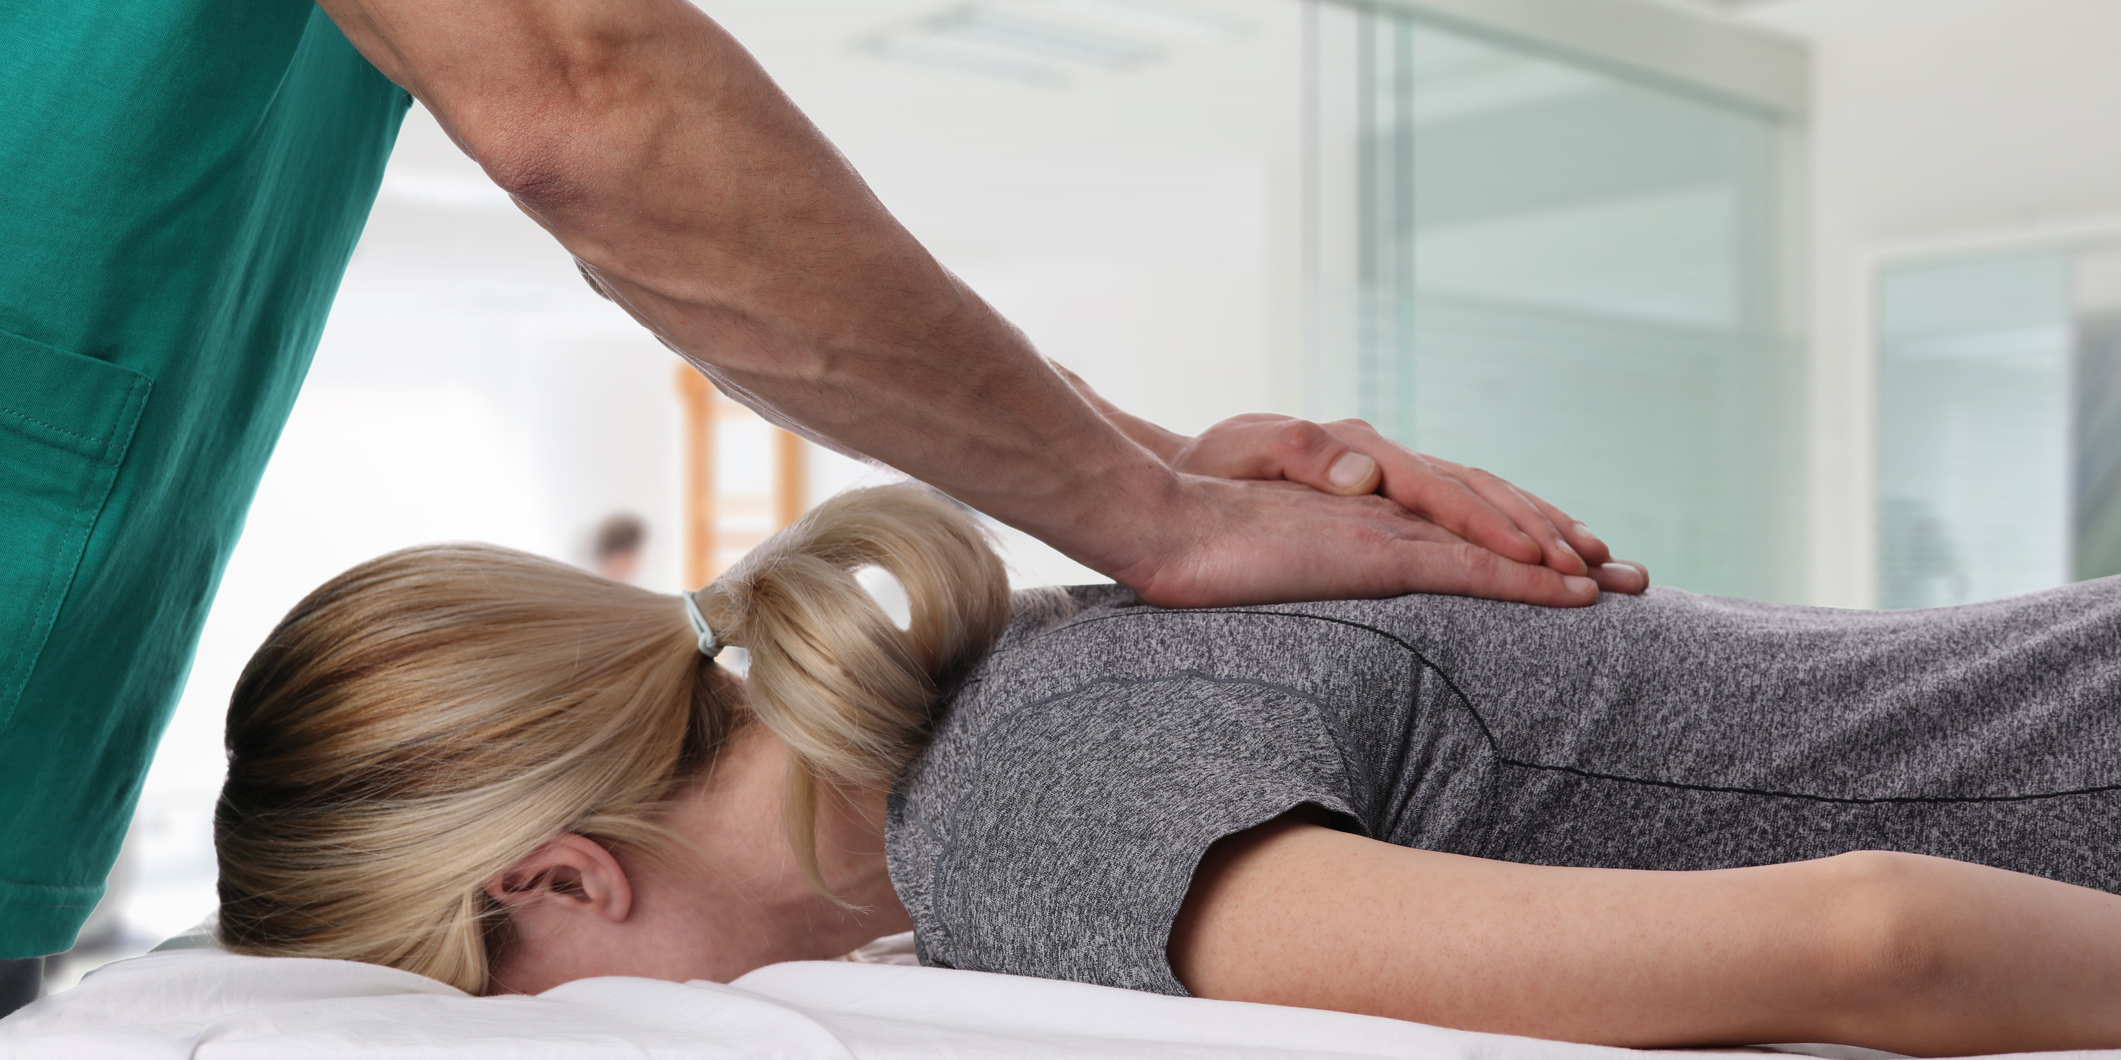 Did You Know Massage Can Help Treat These Six Conditions